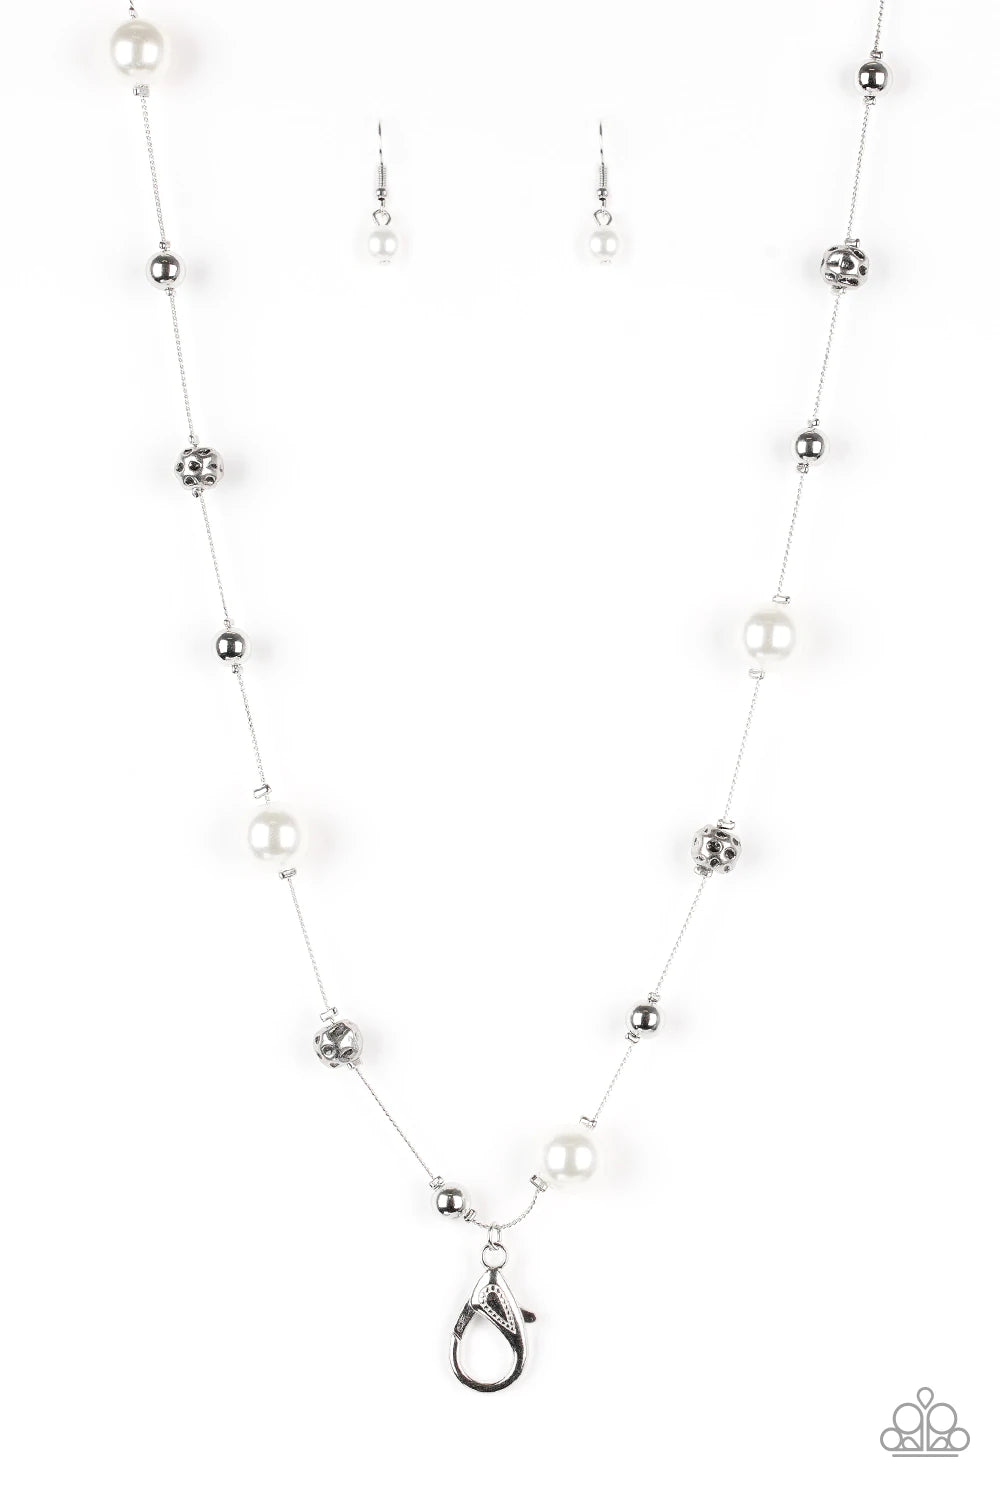 Paparazzi Accessories  - Eloquently Eloquent #N892 Peg - White Lanyard Necklace